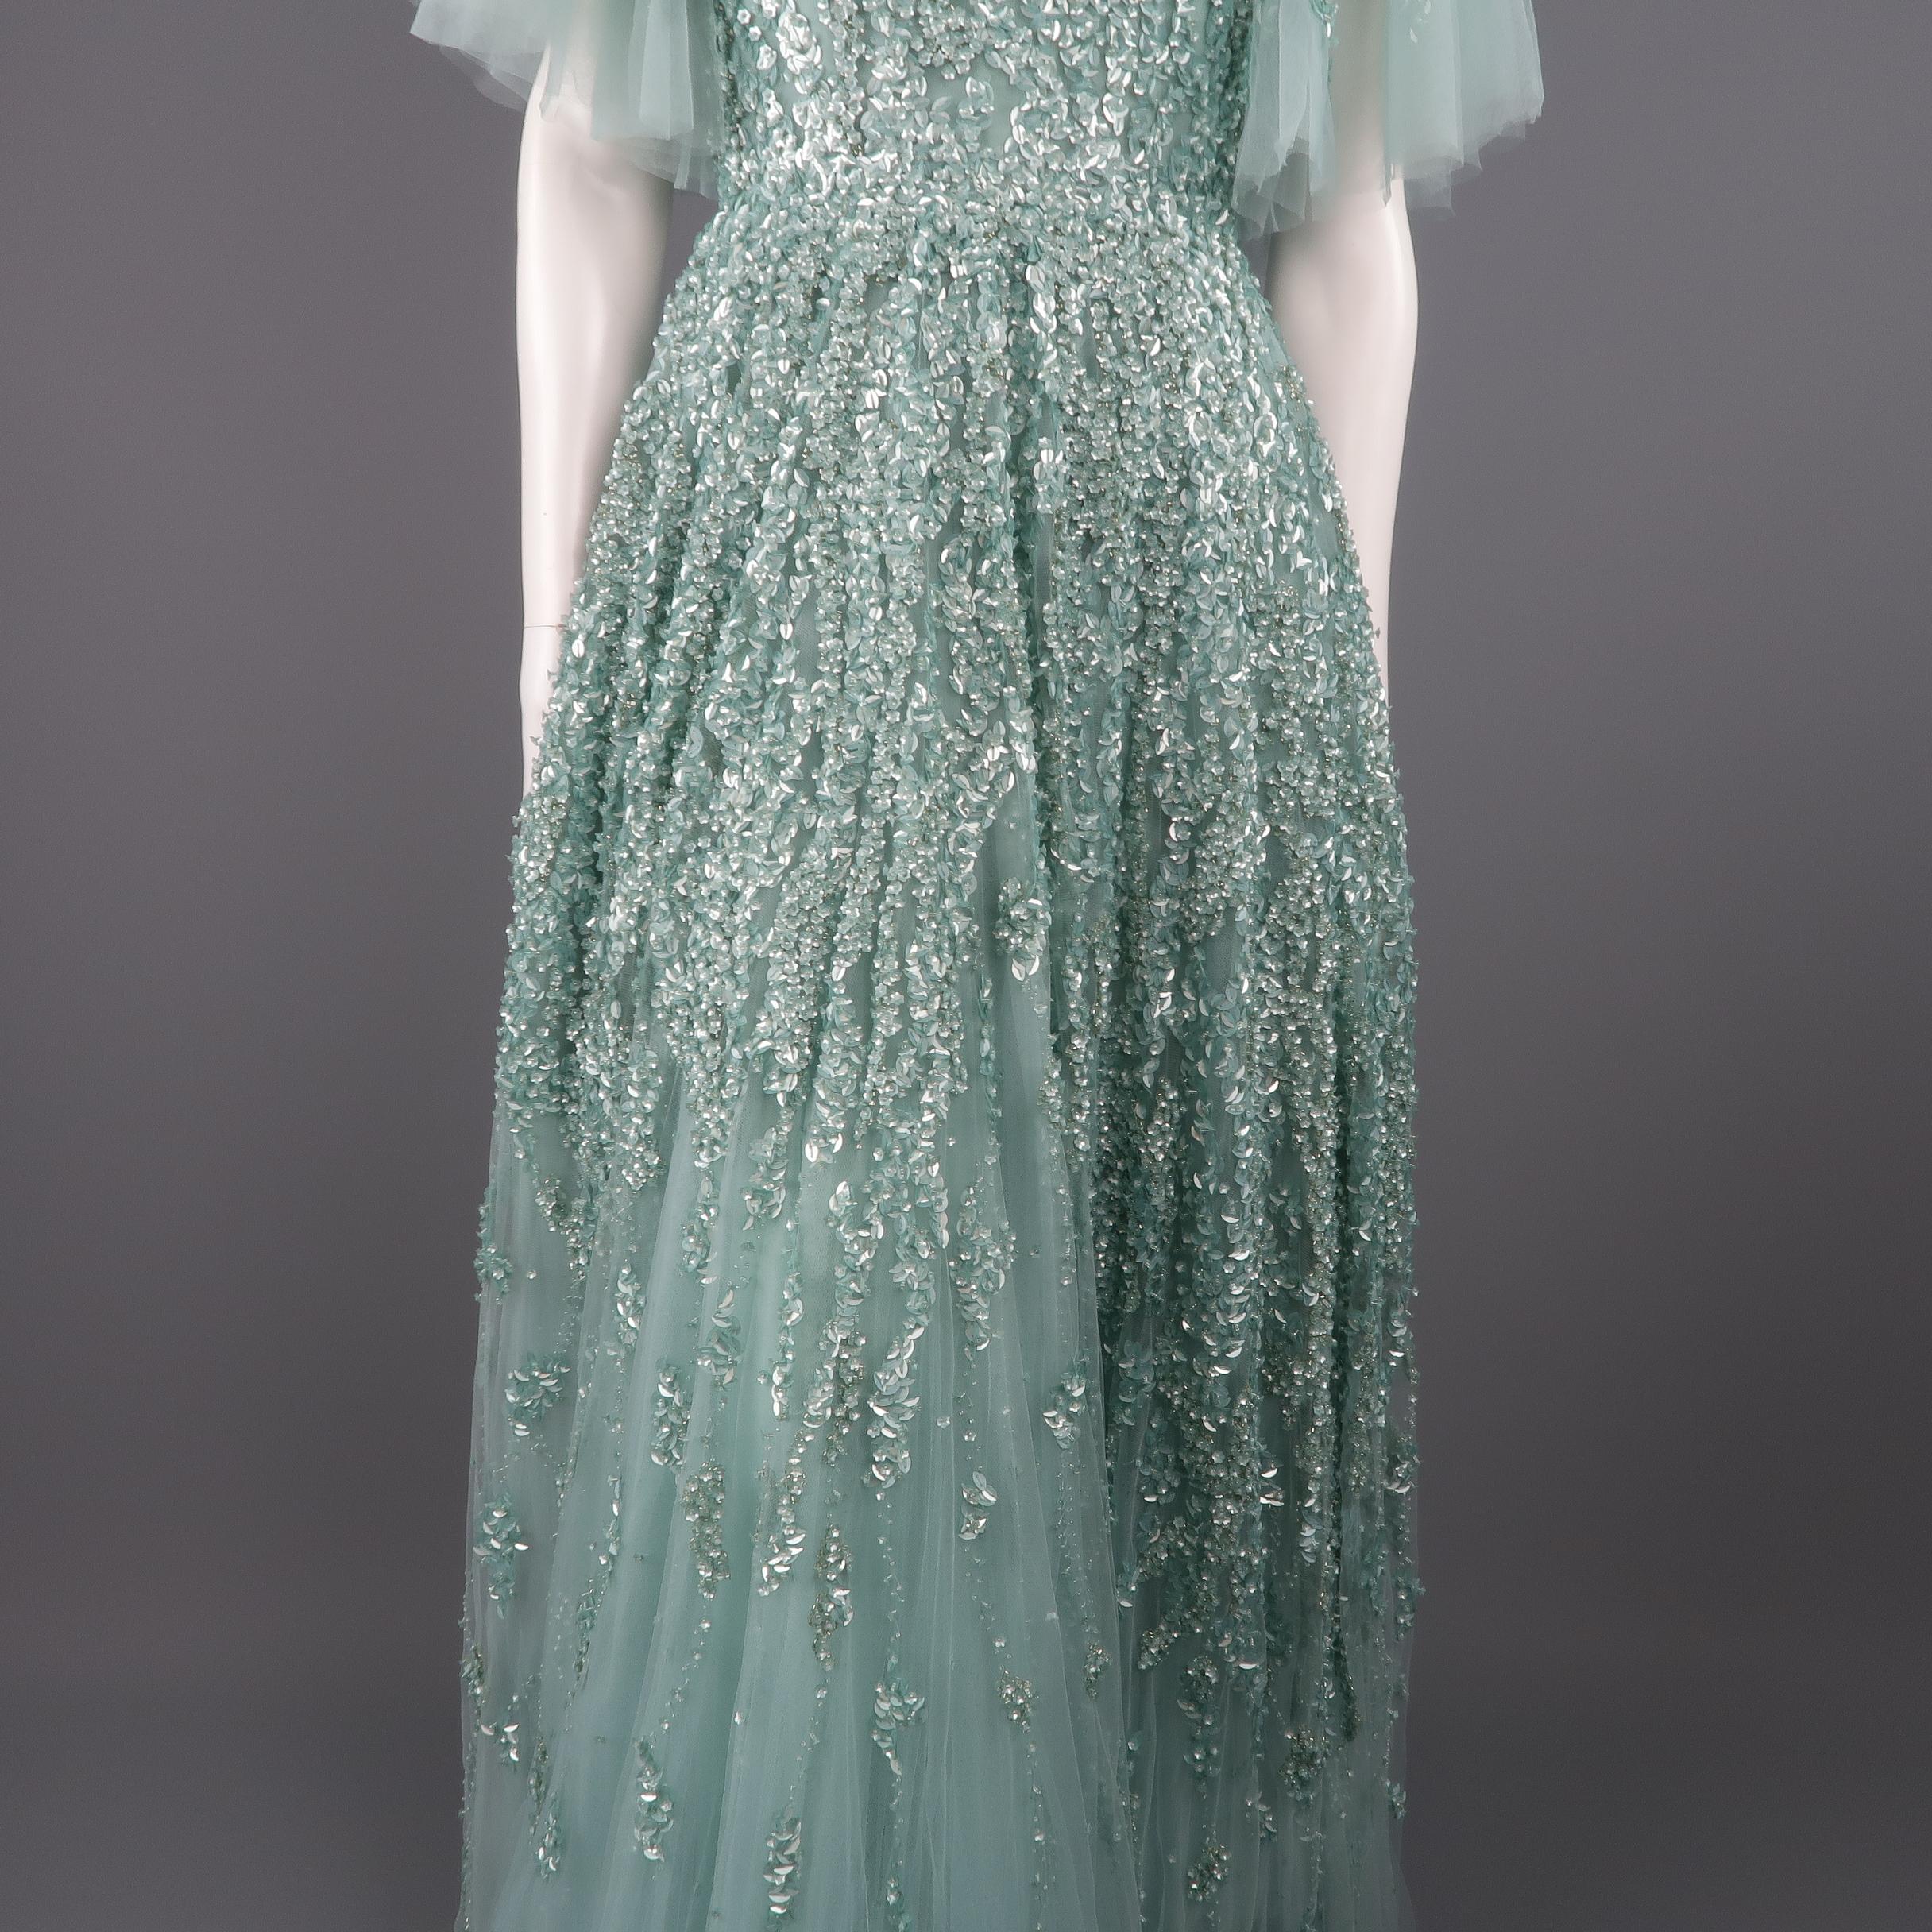 Gray Elie Saab New Sea Foam Silk Beaded Floral Sequin Tulle Dress Gown 